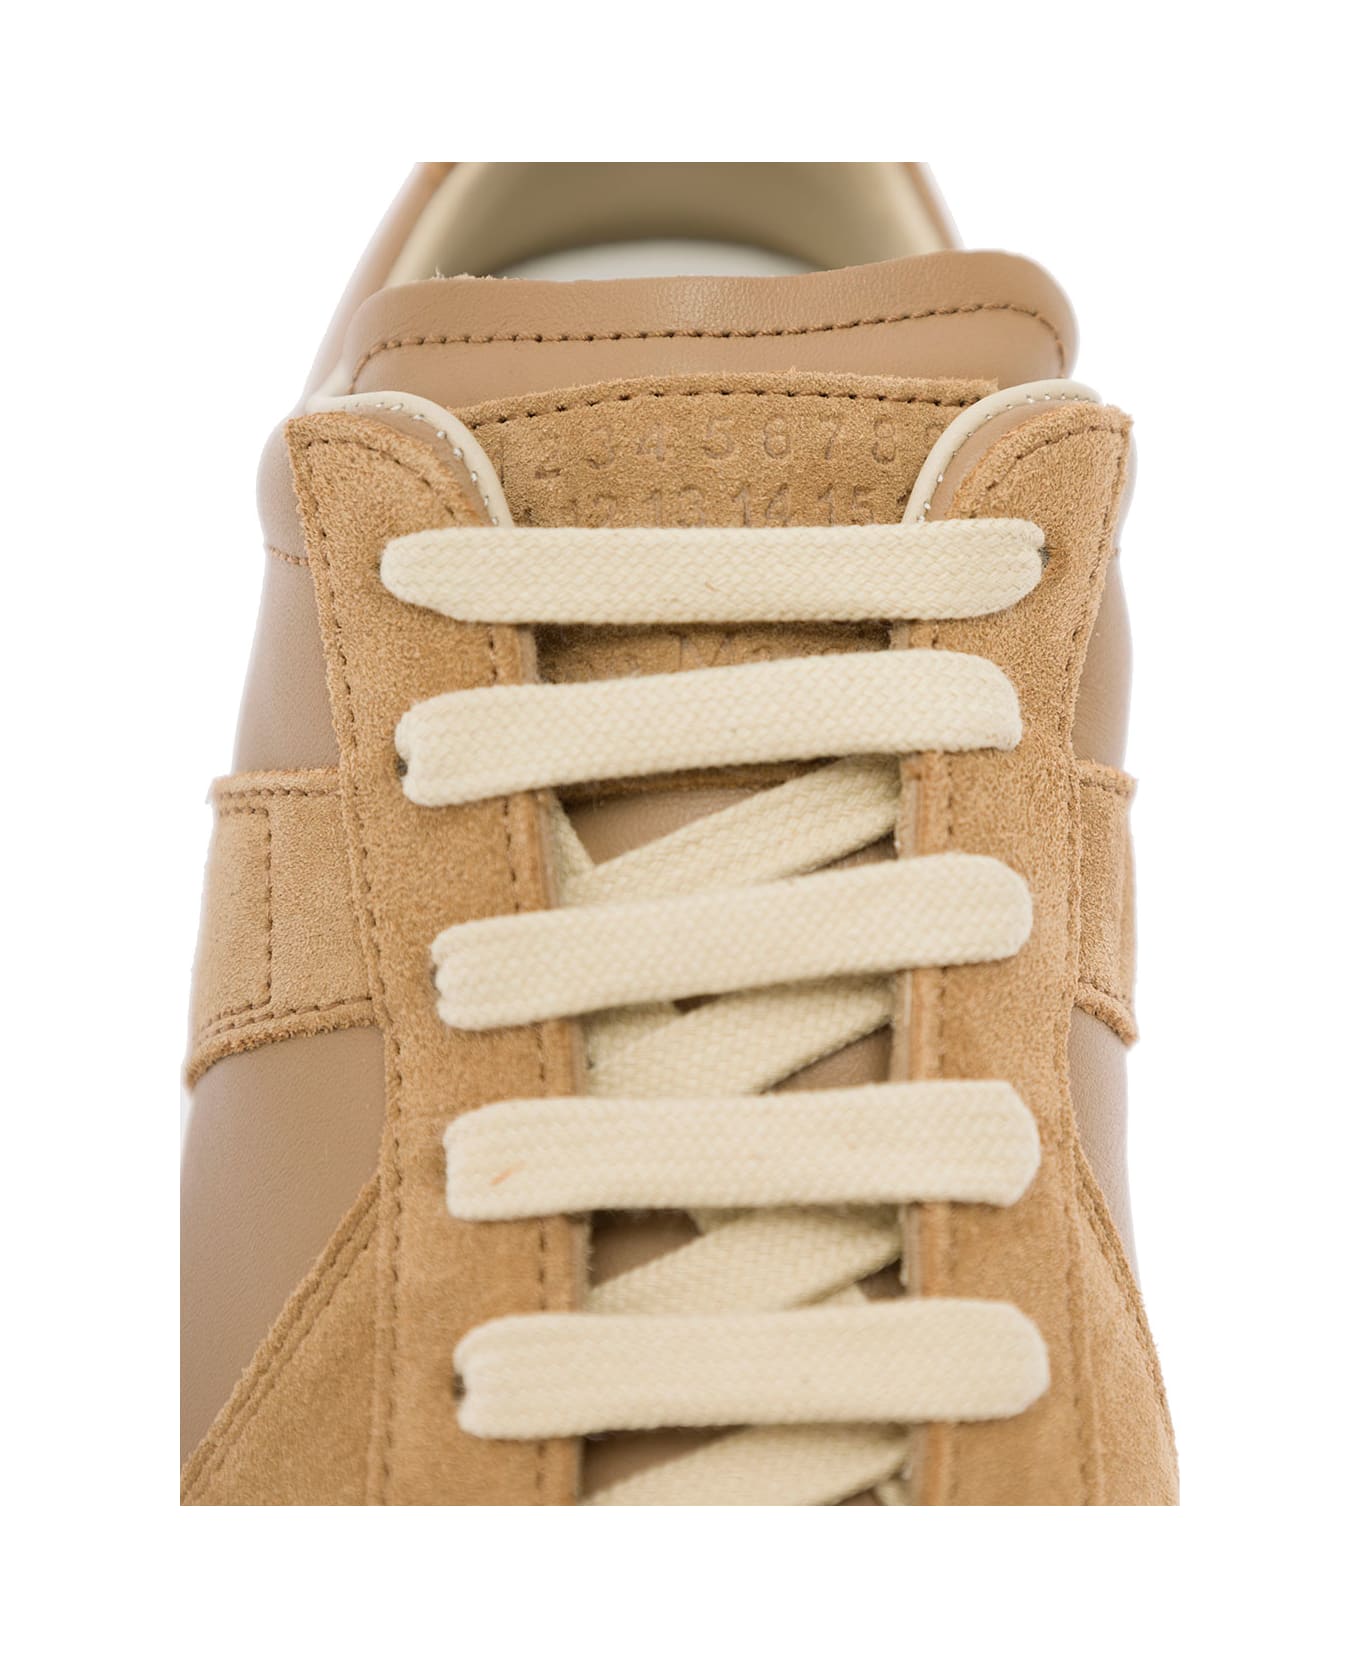 Maison Margiela 'replica' Beige And Brown Low-top Sneakers With Suede Inserts In Leather Woman - Beige